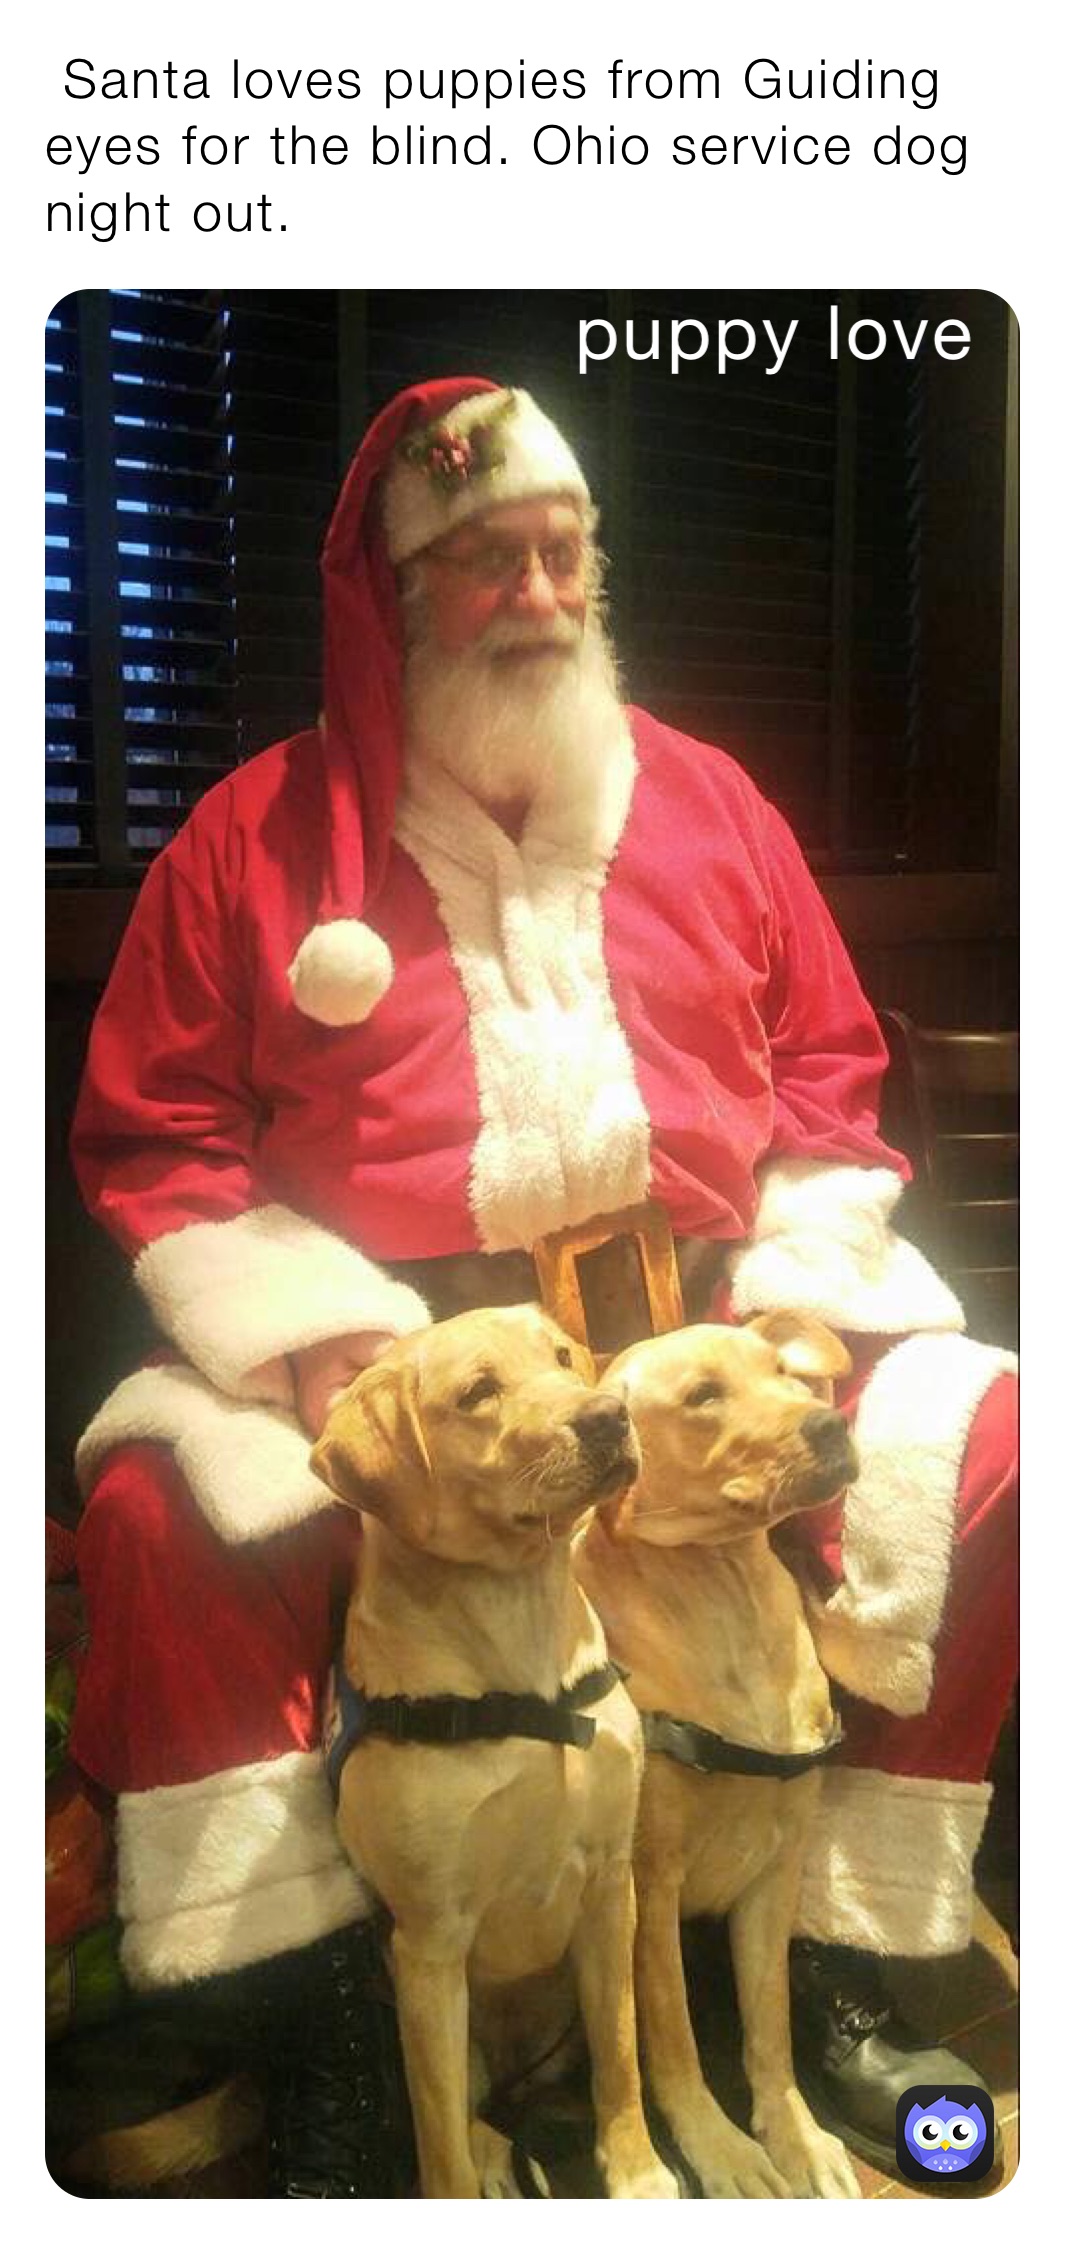  Santa loves puppies from Guiding eyes for the blind. Ohio service dog night out.